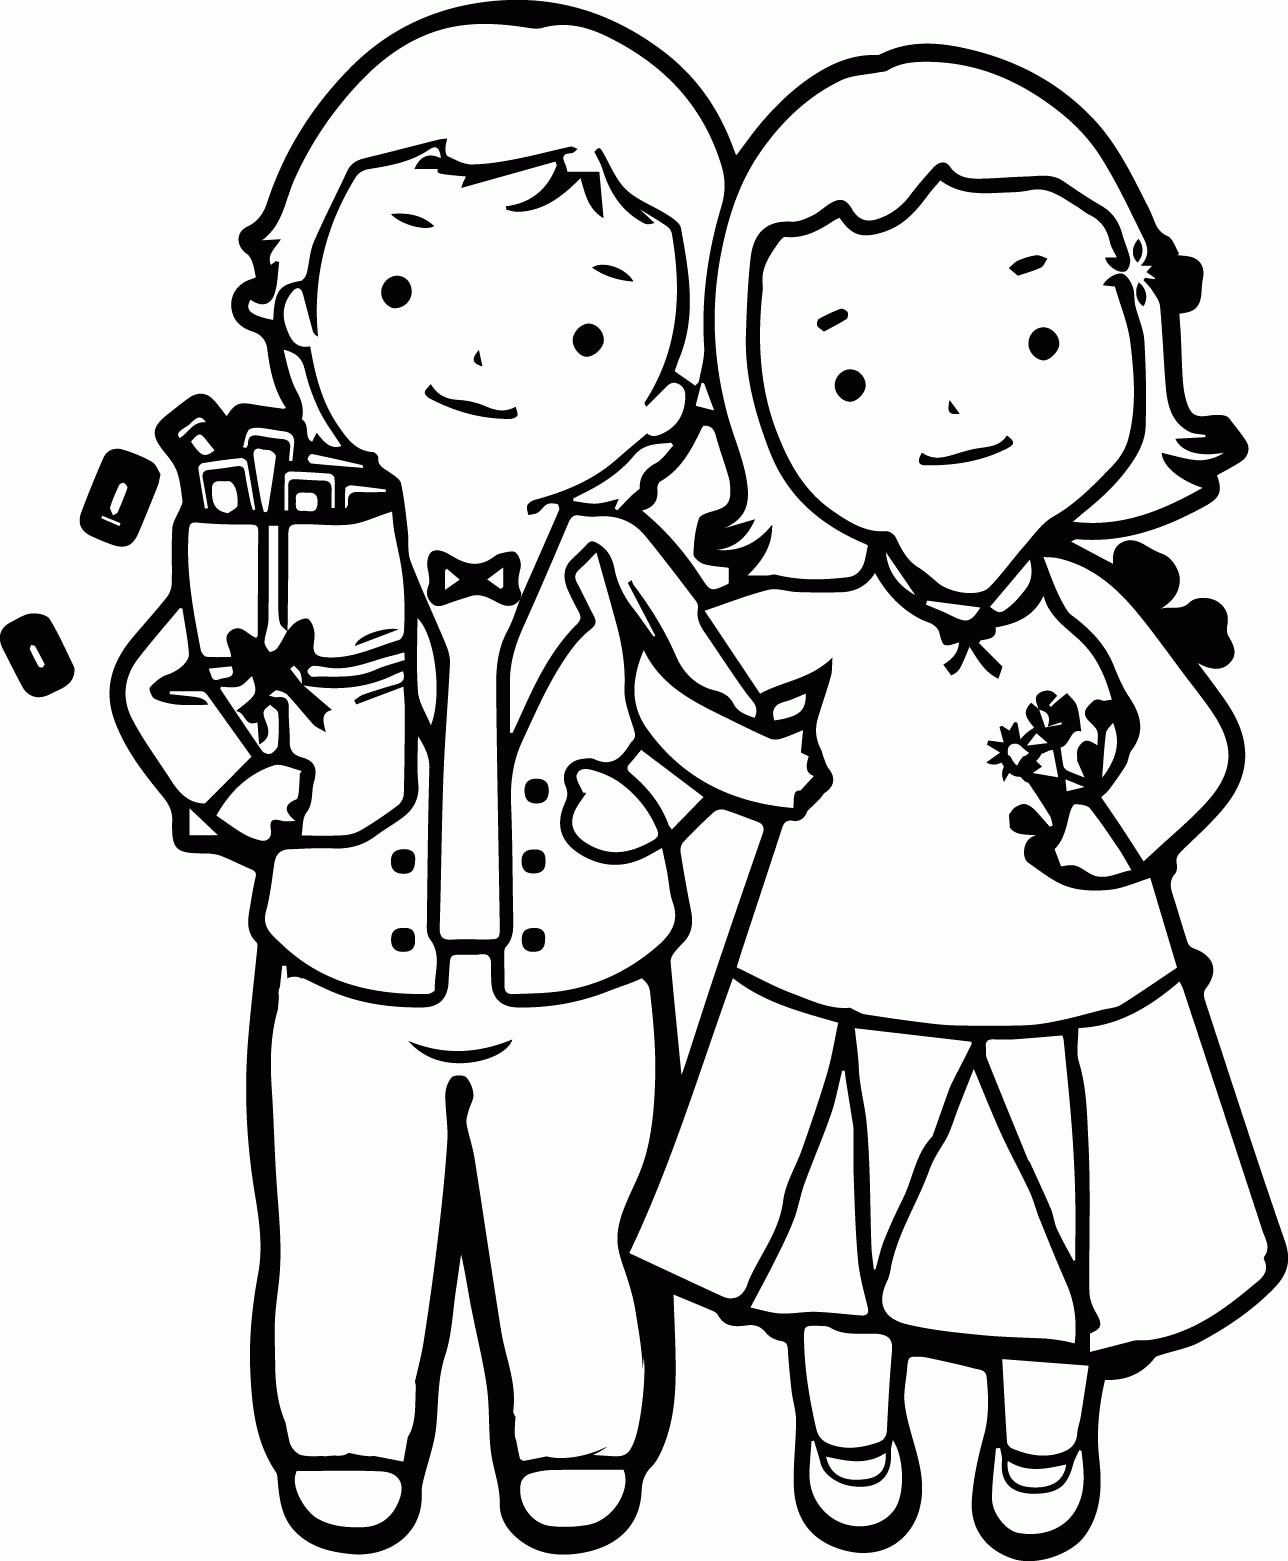 Girl And Boy Coloring Page | Wecoloringpage